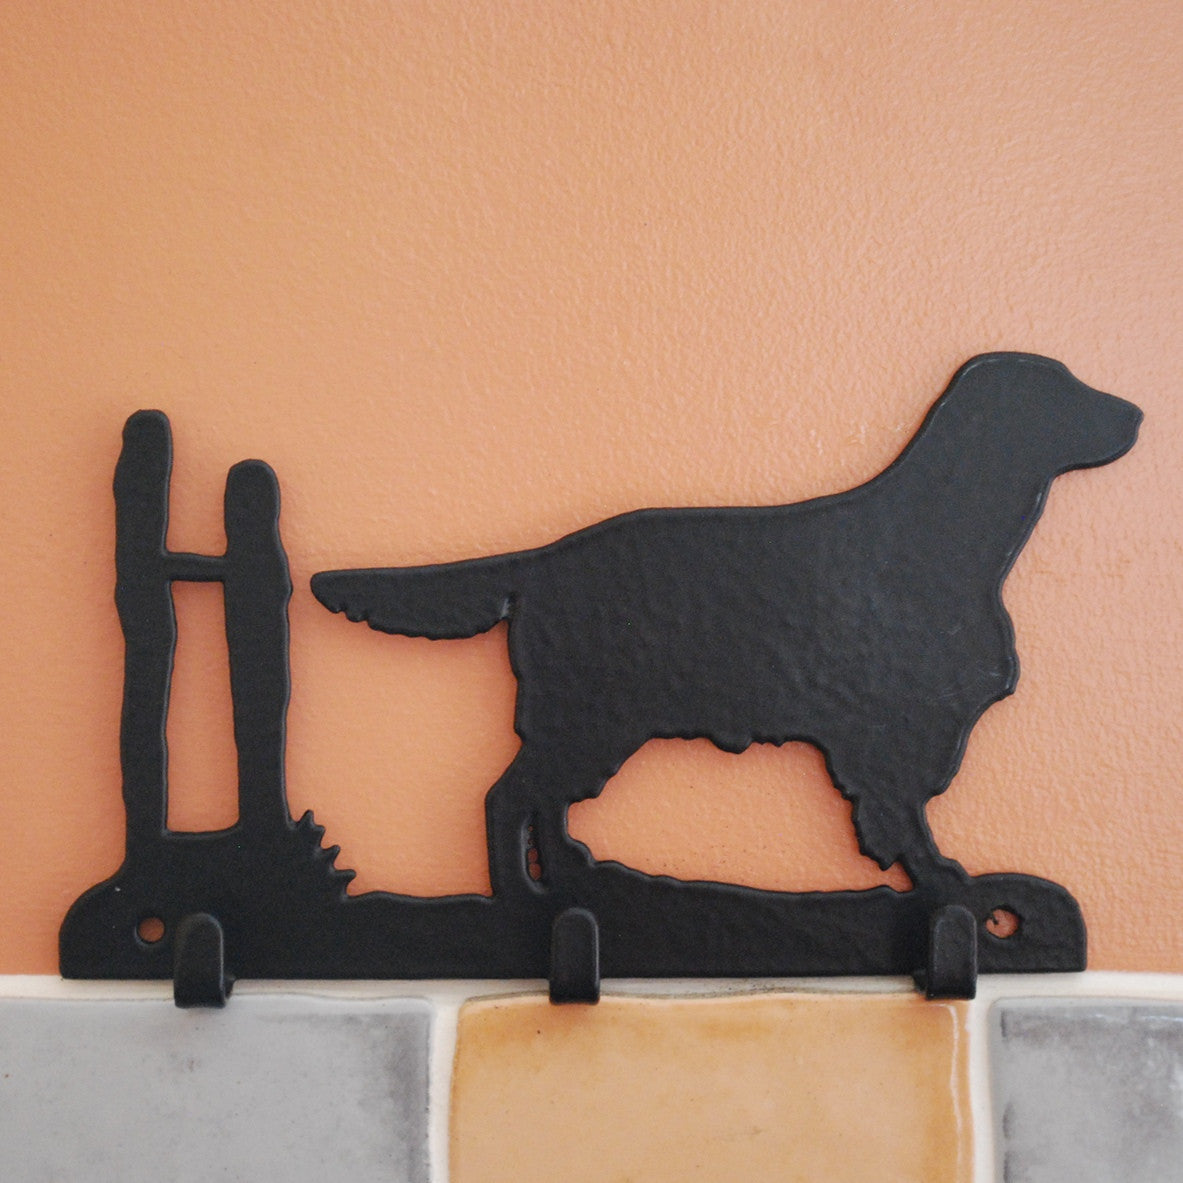 Yorkshire Terrier Dog Key Racks - 3 Hooks - Fernie's Choice Classic Country Wear for Dogs